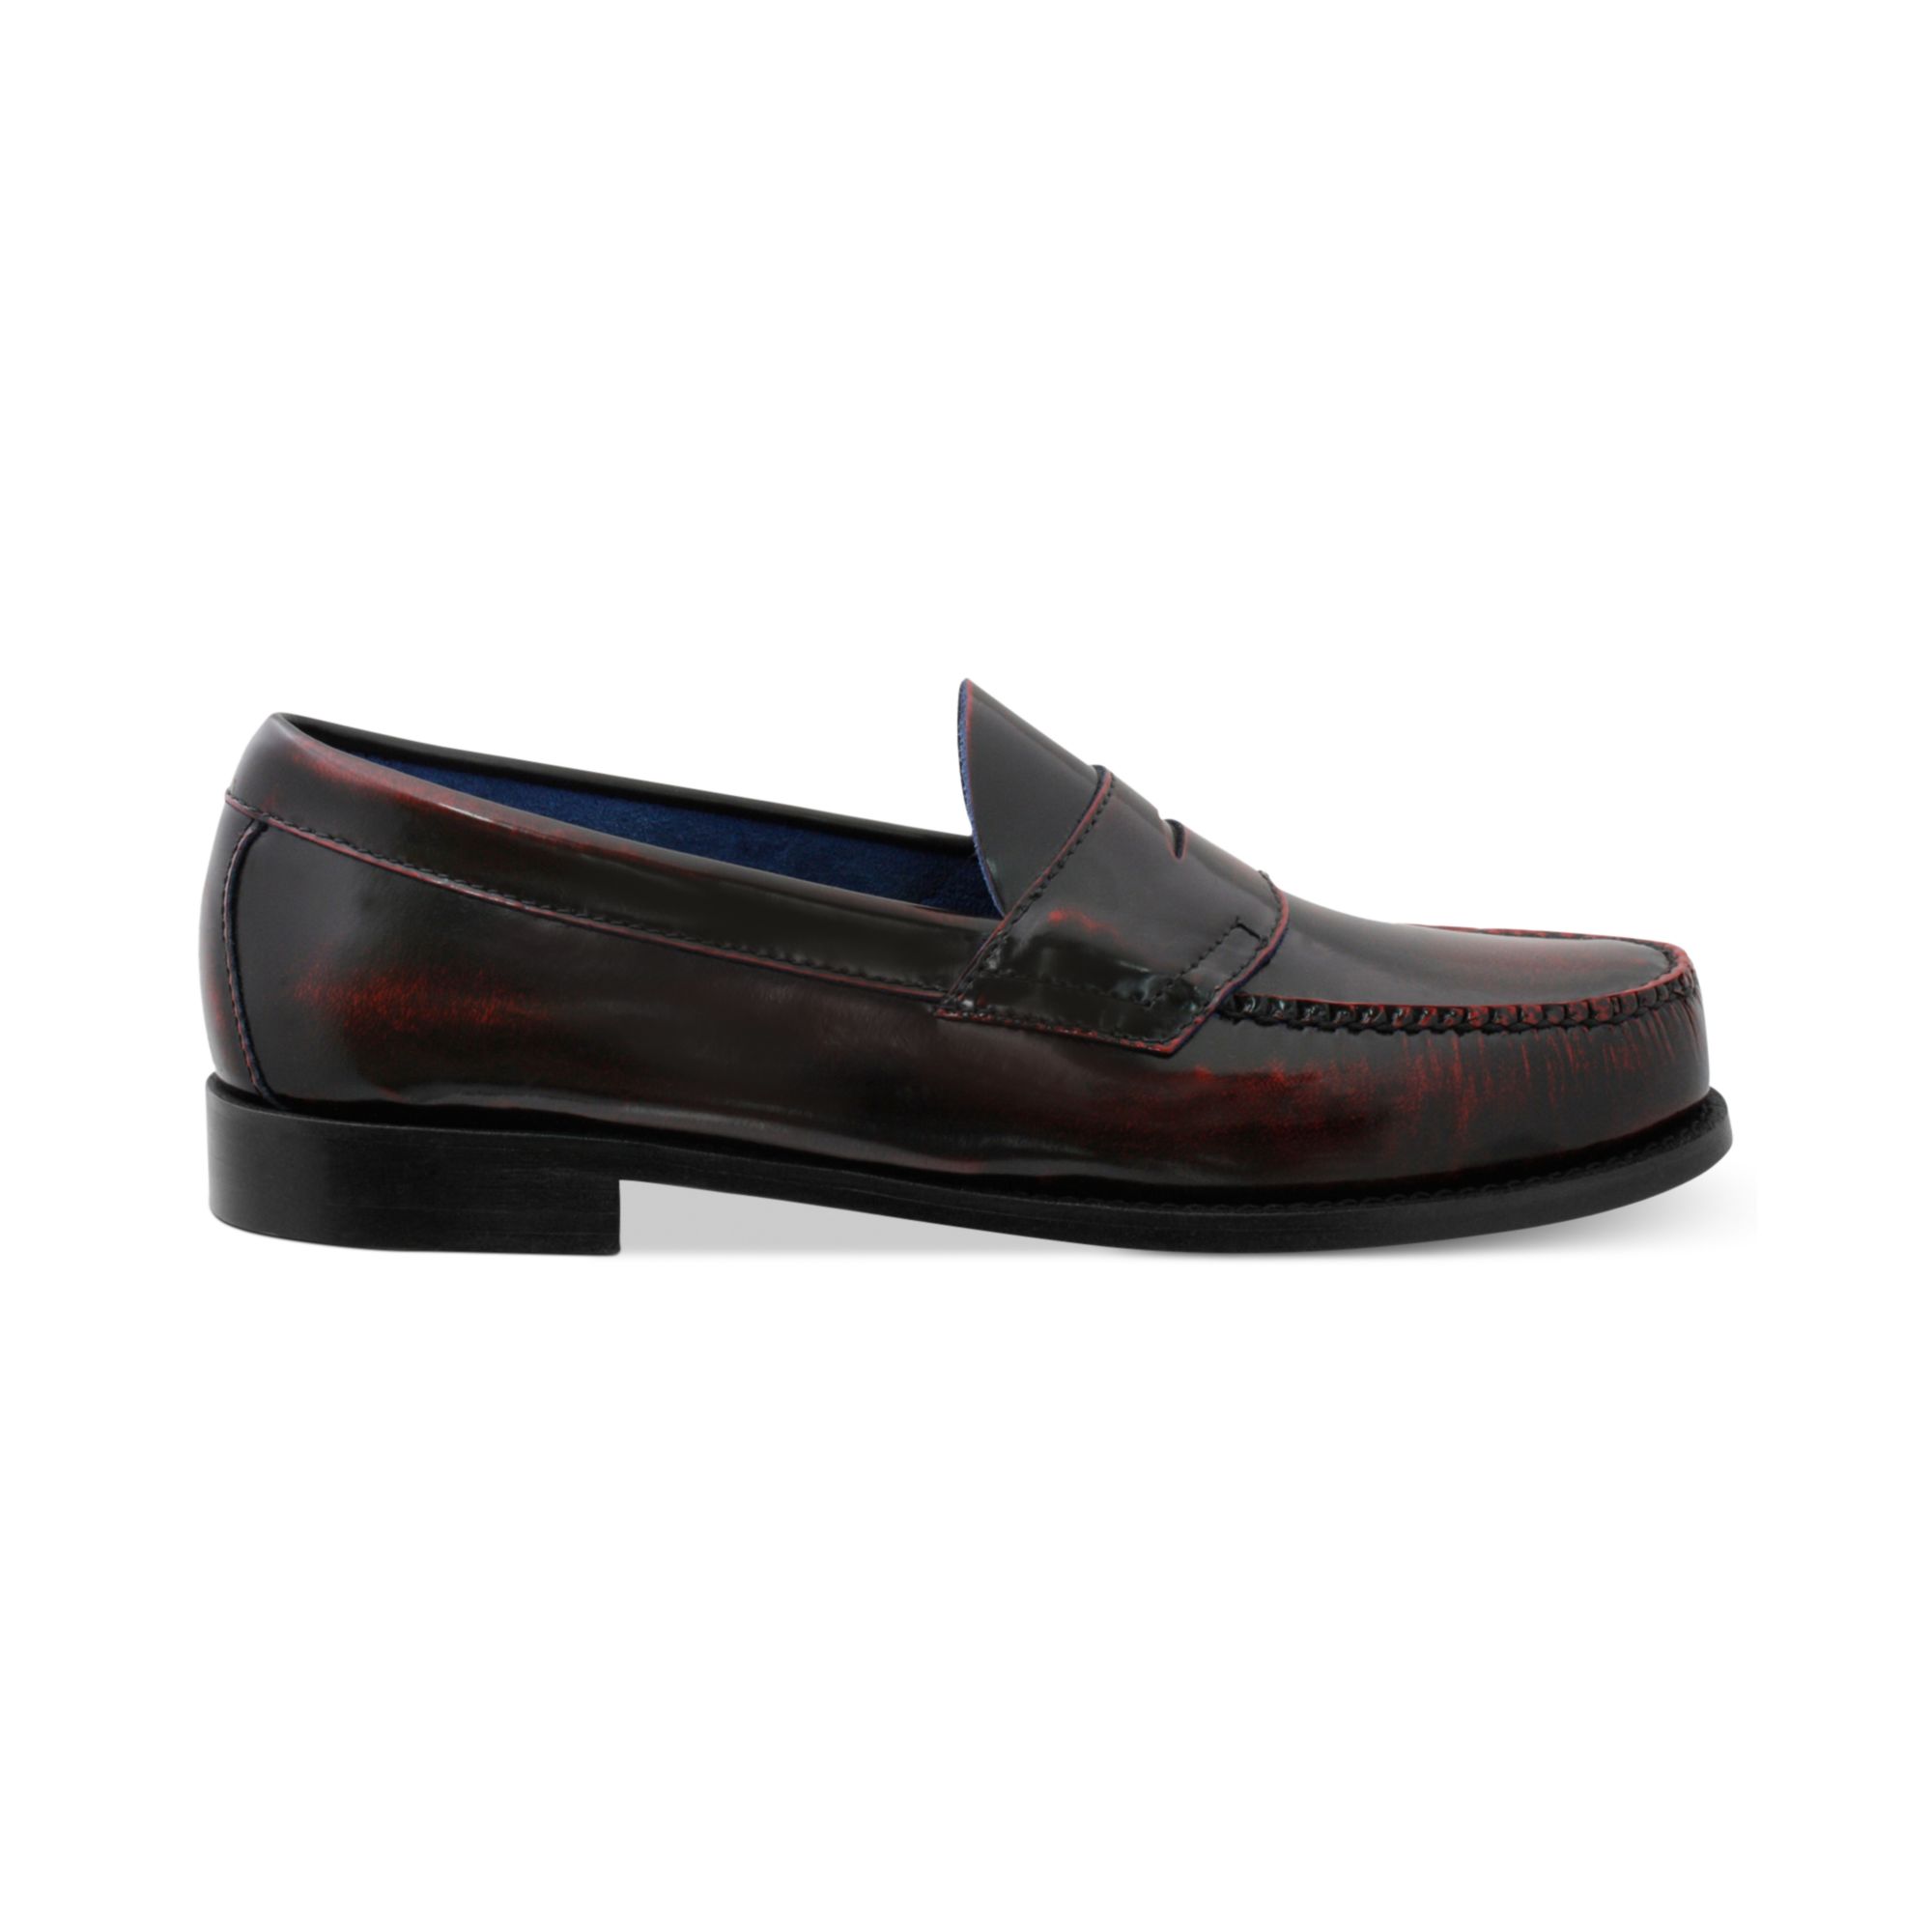 Lyst - G.H. Bass & Co. Rencrist Weejun Flat Strap Penny Loafers in Red ...